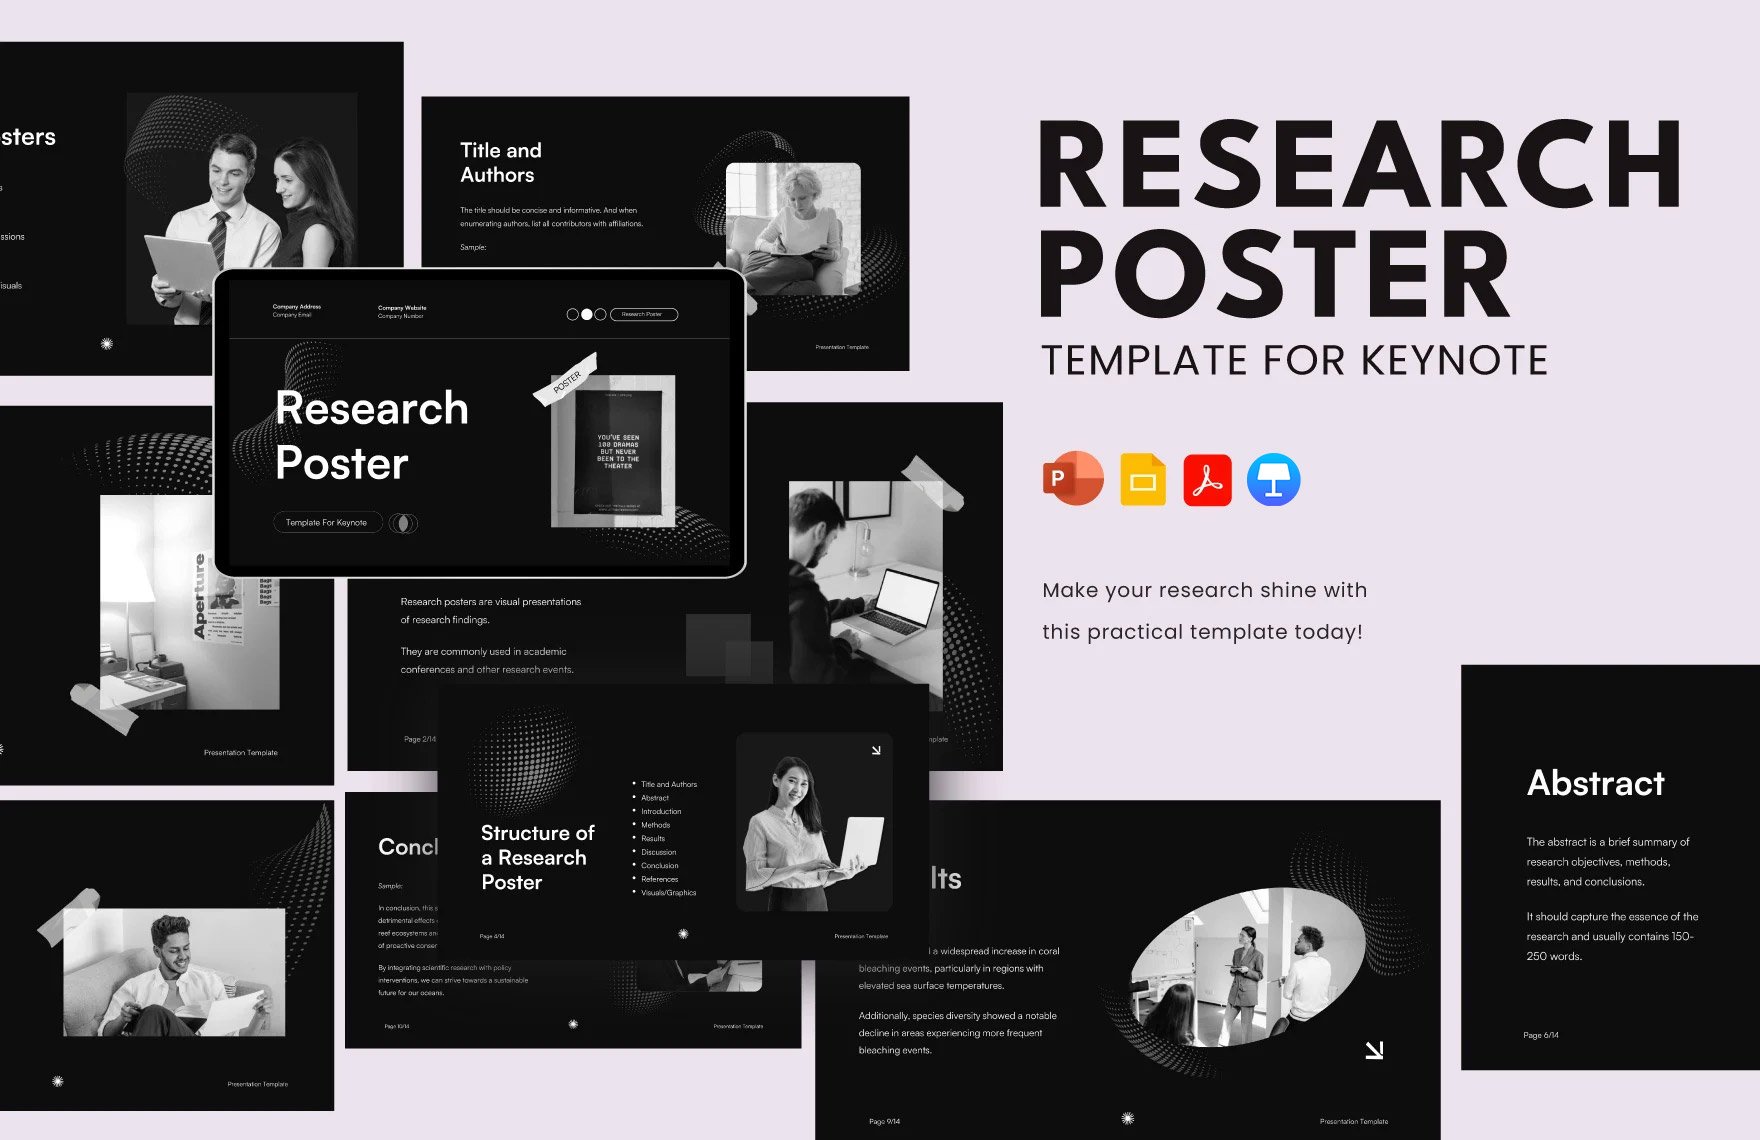 Research Poster Template for Keynote in PDF, PowerPoint, Google Slides, Apple Keynote